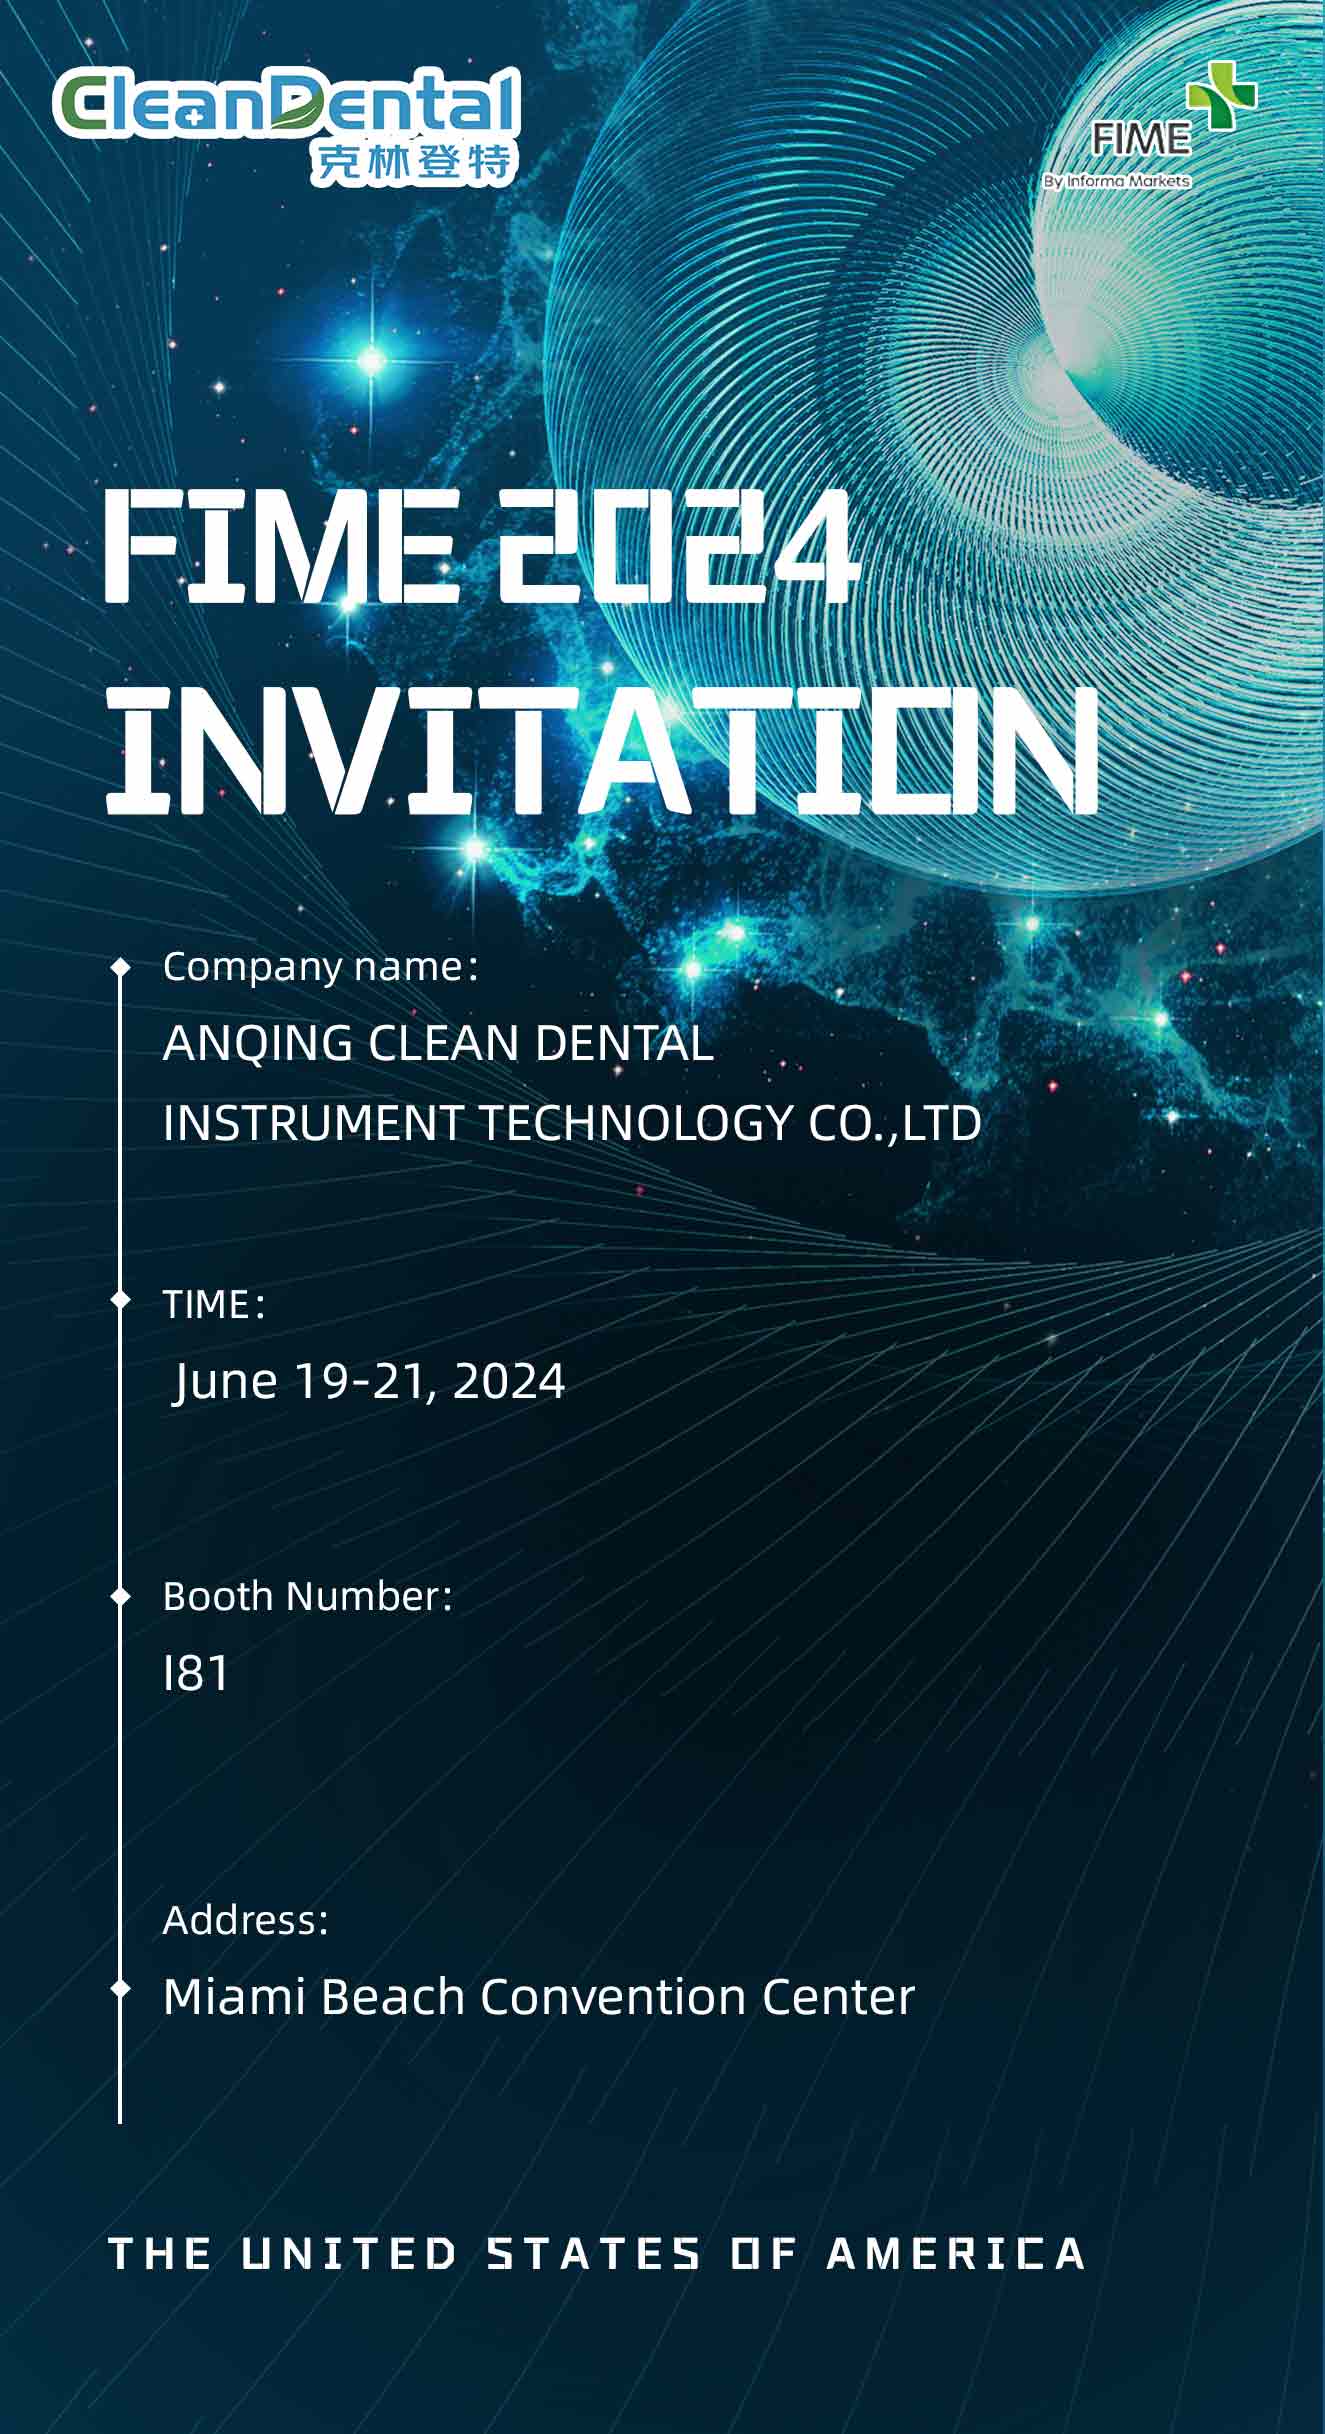 How Clean Dental would showing in the  FIME exhibition?